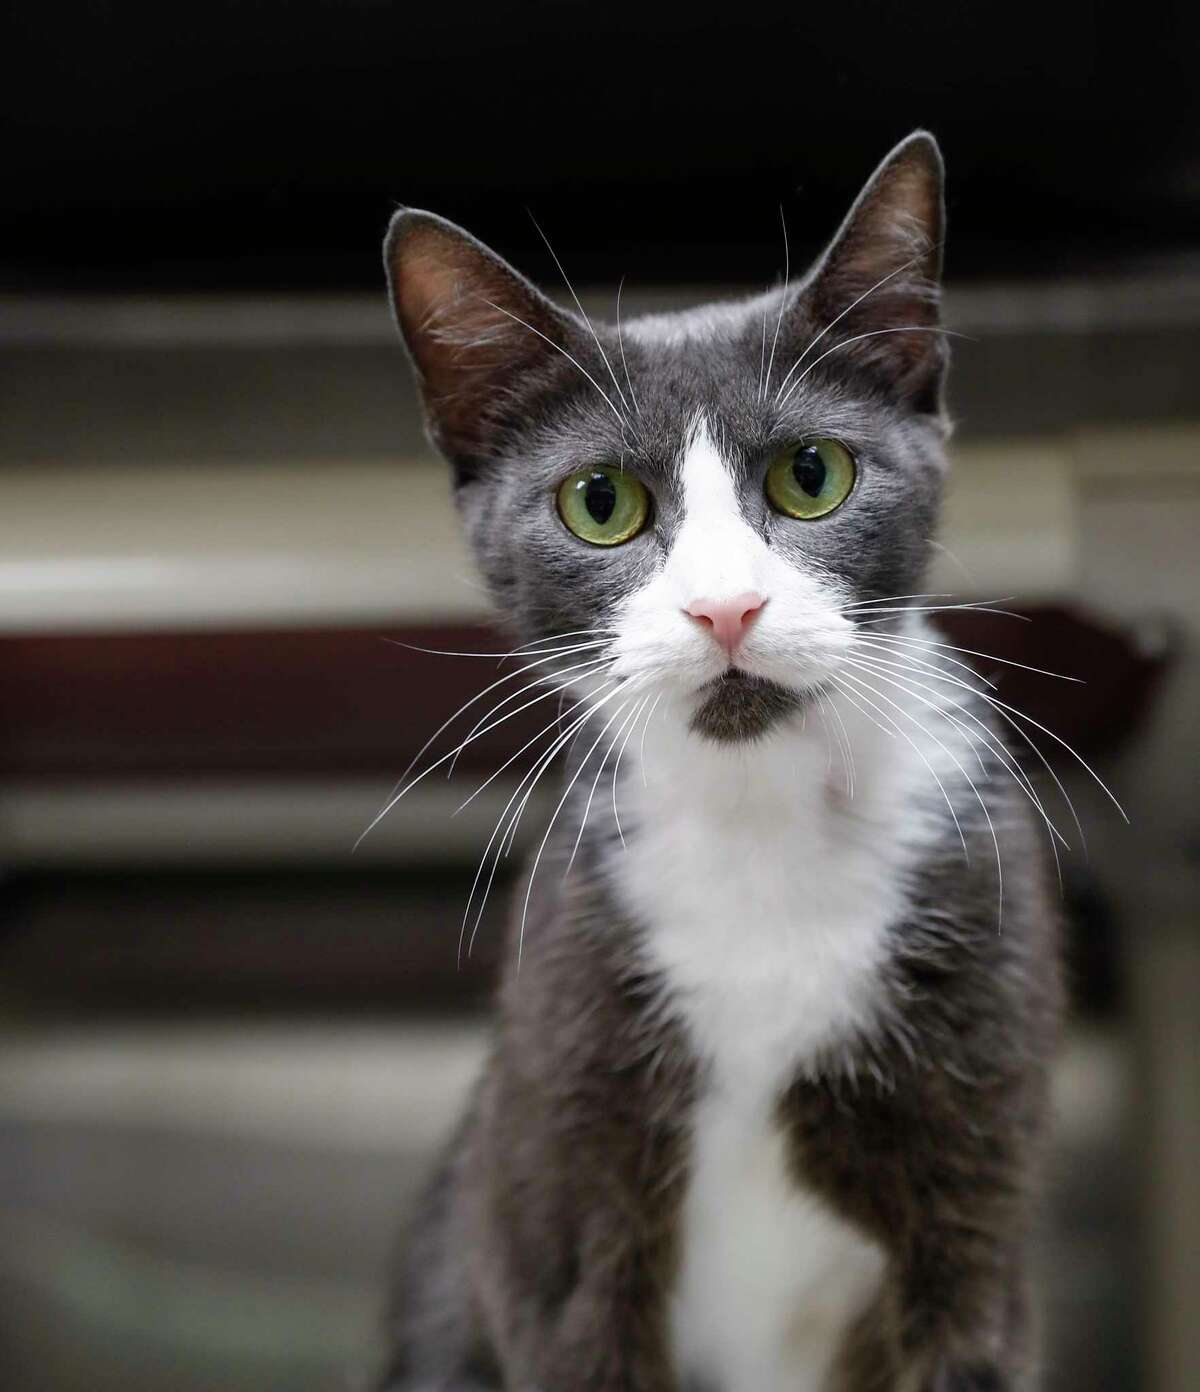 Donatella (A555564) is a 3-year-old, female, Japanese Bobtail mix cat who was brought in as a stray.